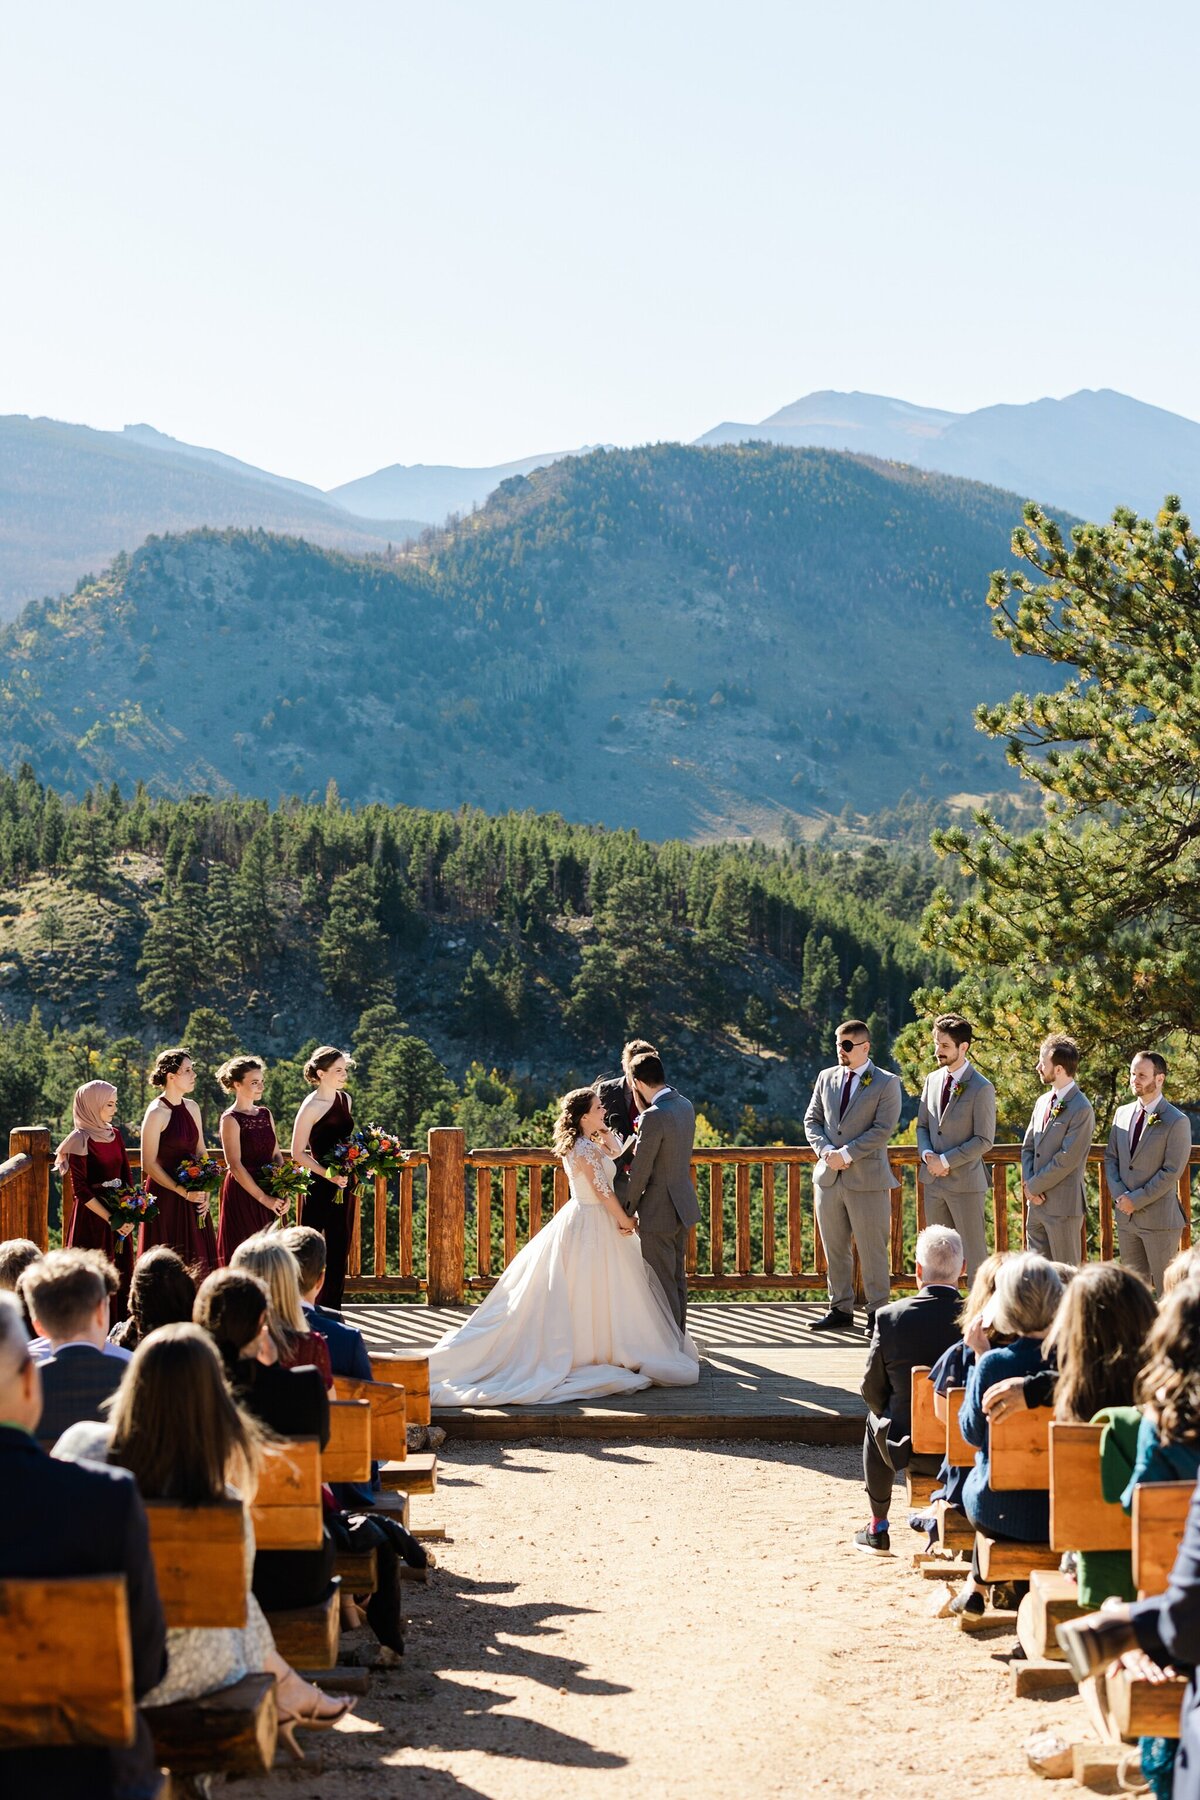 Candid shot of a bride and groom during their wedding ceremony at the YMCA of the Rockies in Estes Park, Colorado. The couple face towards each other in front of their officiant while their wedding party flanks them on either side. Many guests can be seen in the foreground while rows and rows of trees and mountains can be seen off in the distance behind the couple.